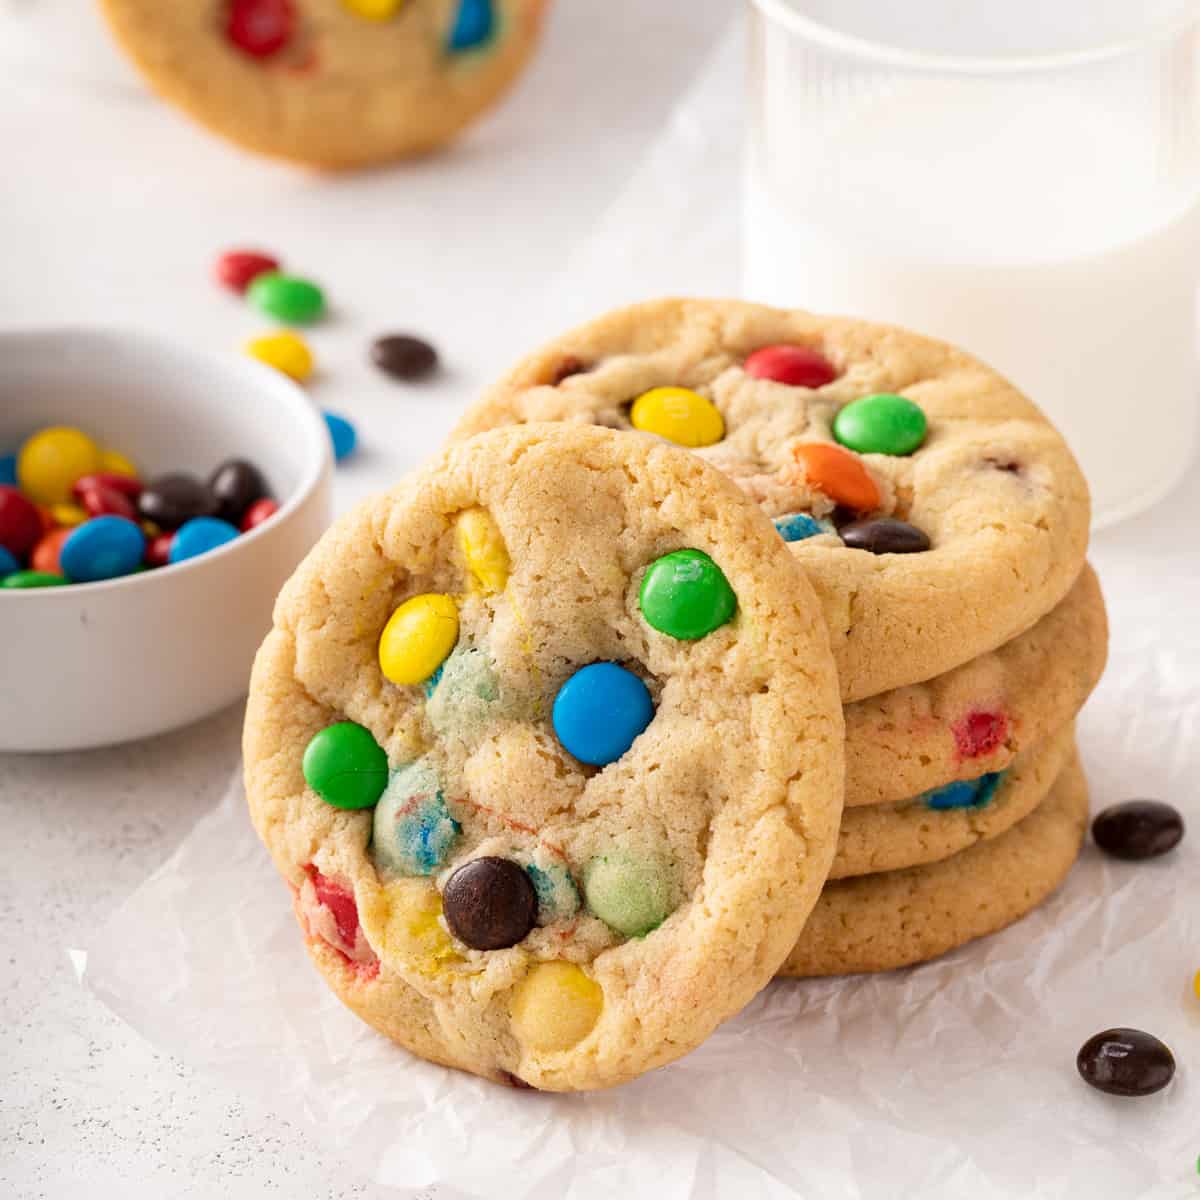 M&M's Crunchy Cookie 24 Count